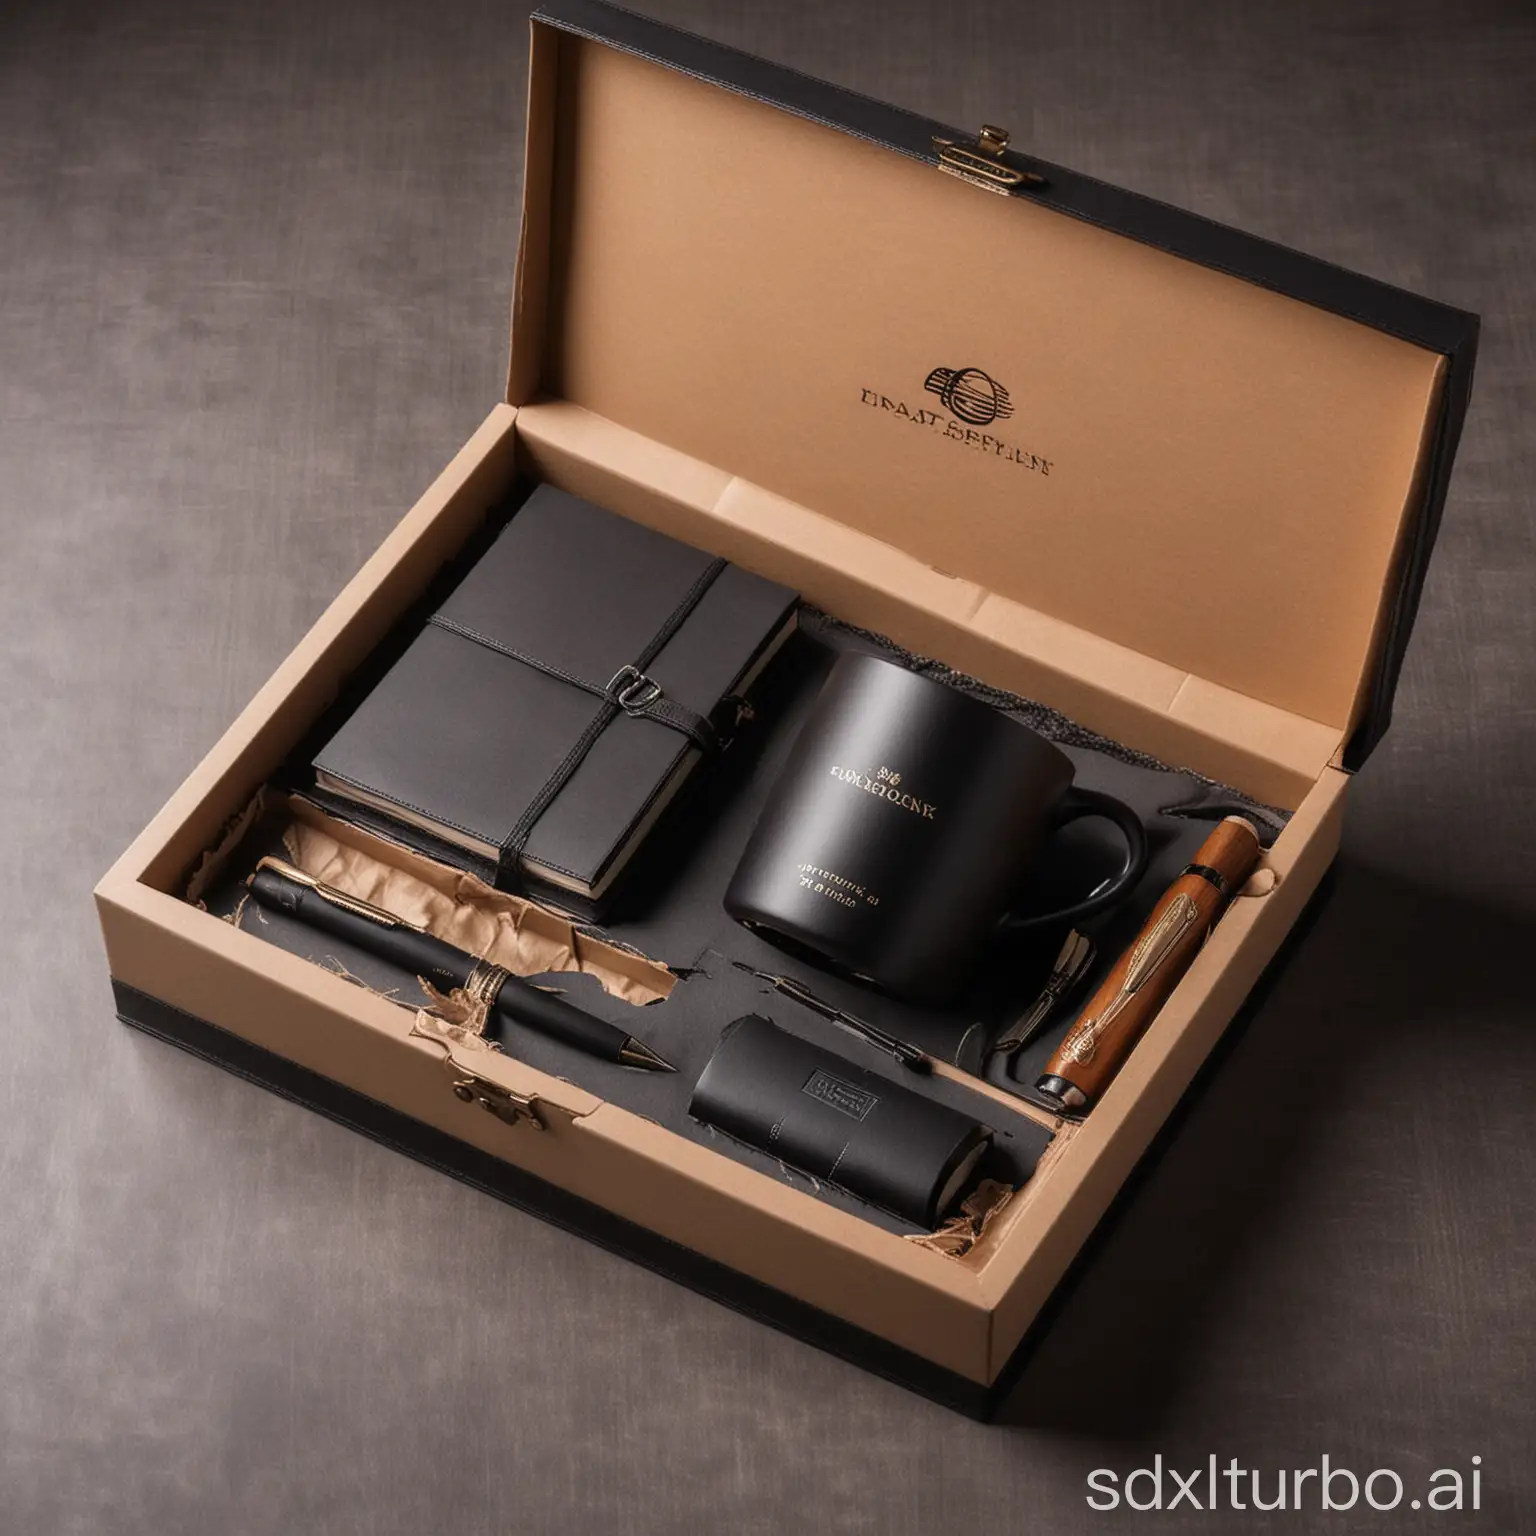 A variety of corporate gifts, such as mugs, pens, and notebooks, are neatly arranged in a gift box. The box is made of a high-quality material and has a luxurious look.